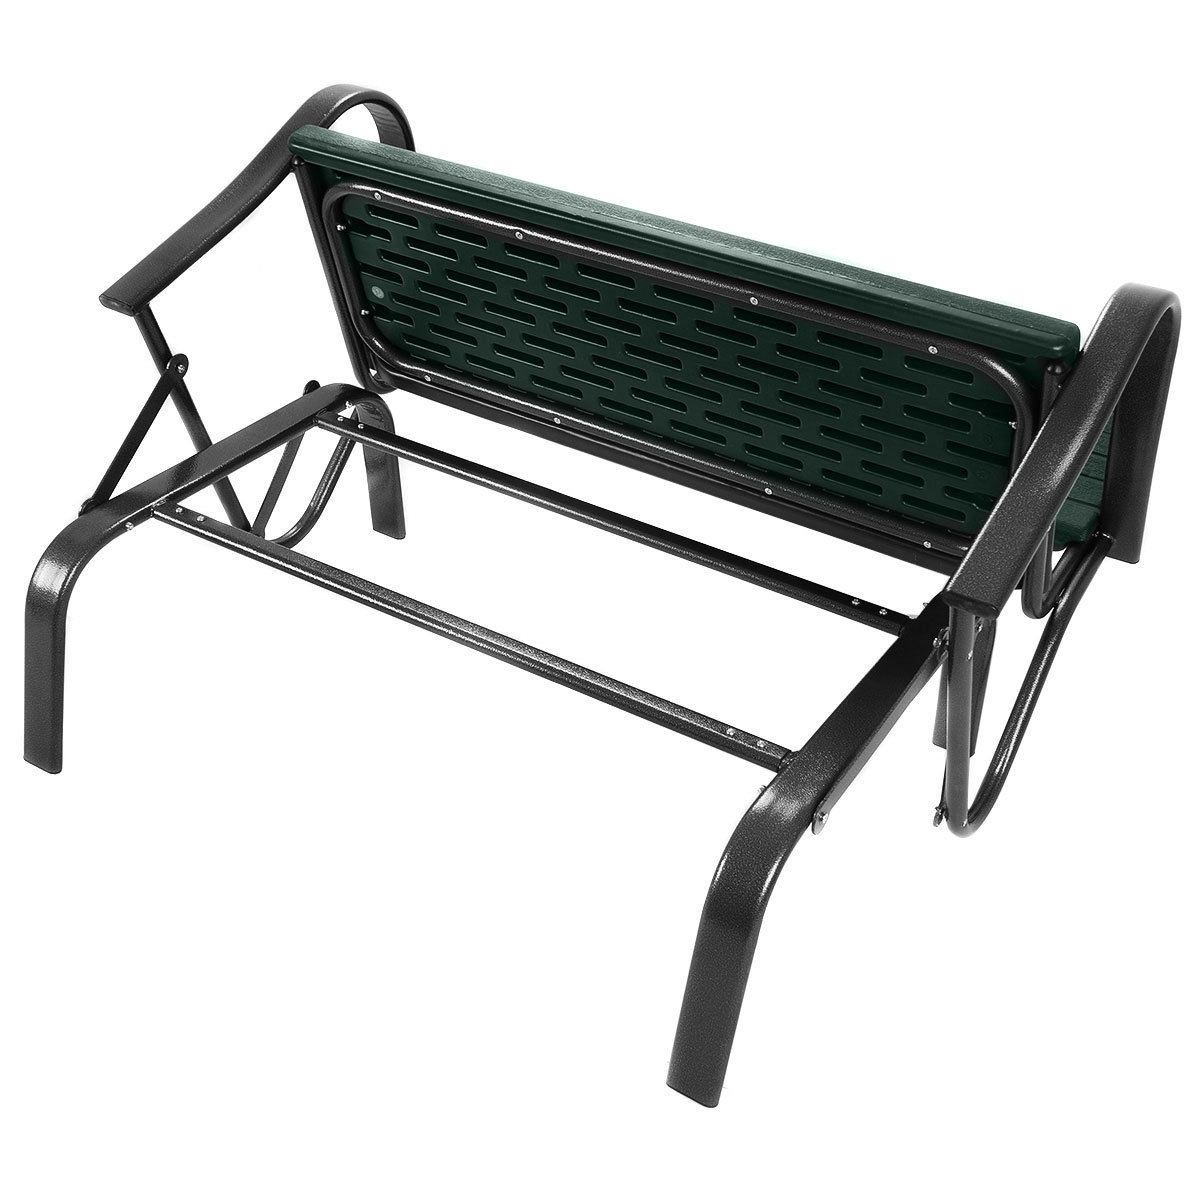 Outdoor Patio Swing Porch Rocker Glider Bench Loveseat Pertaining To Latest Outdoor Patio Swing Glider Bench Chair S (View 21 of 25)